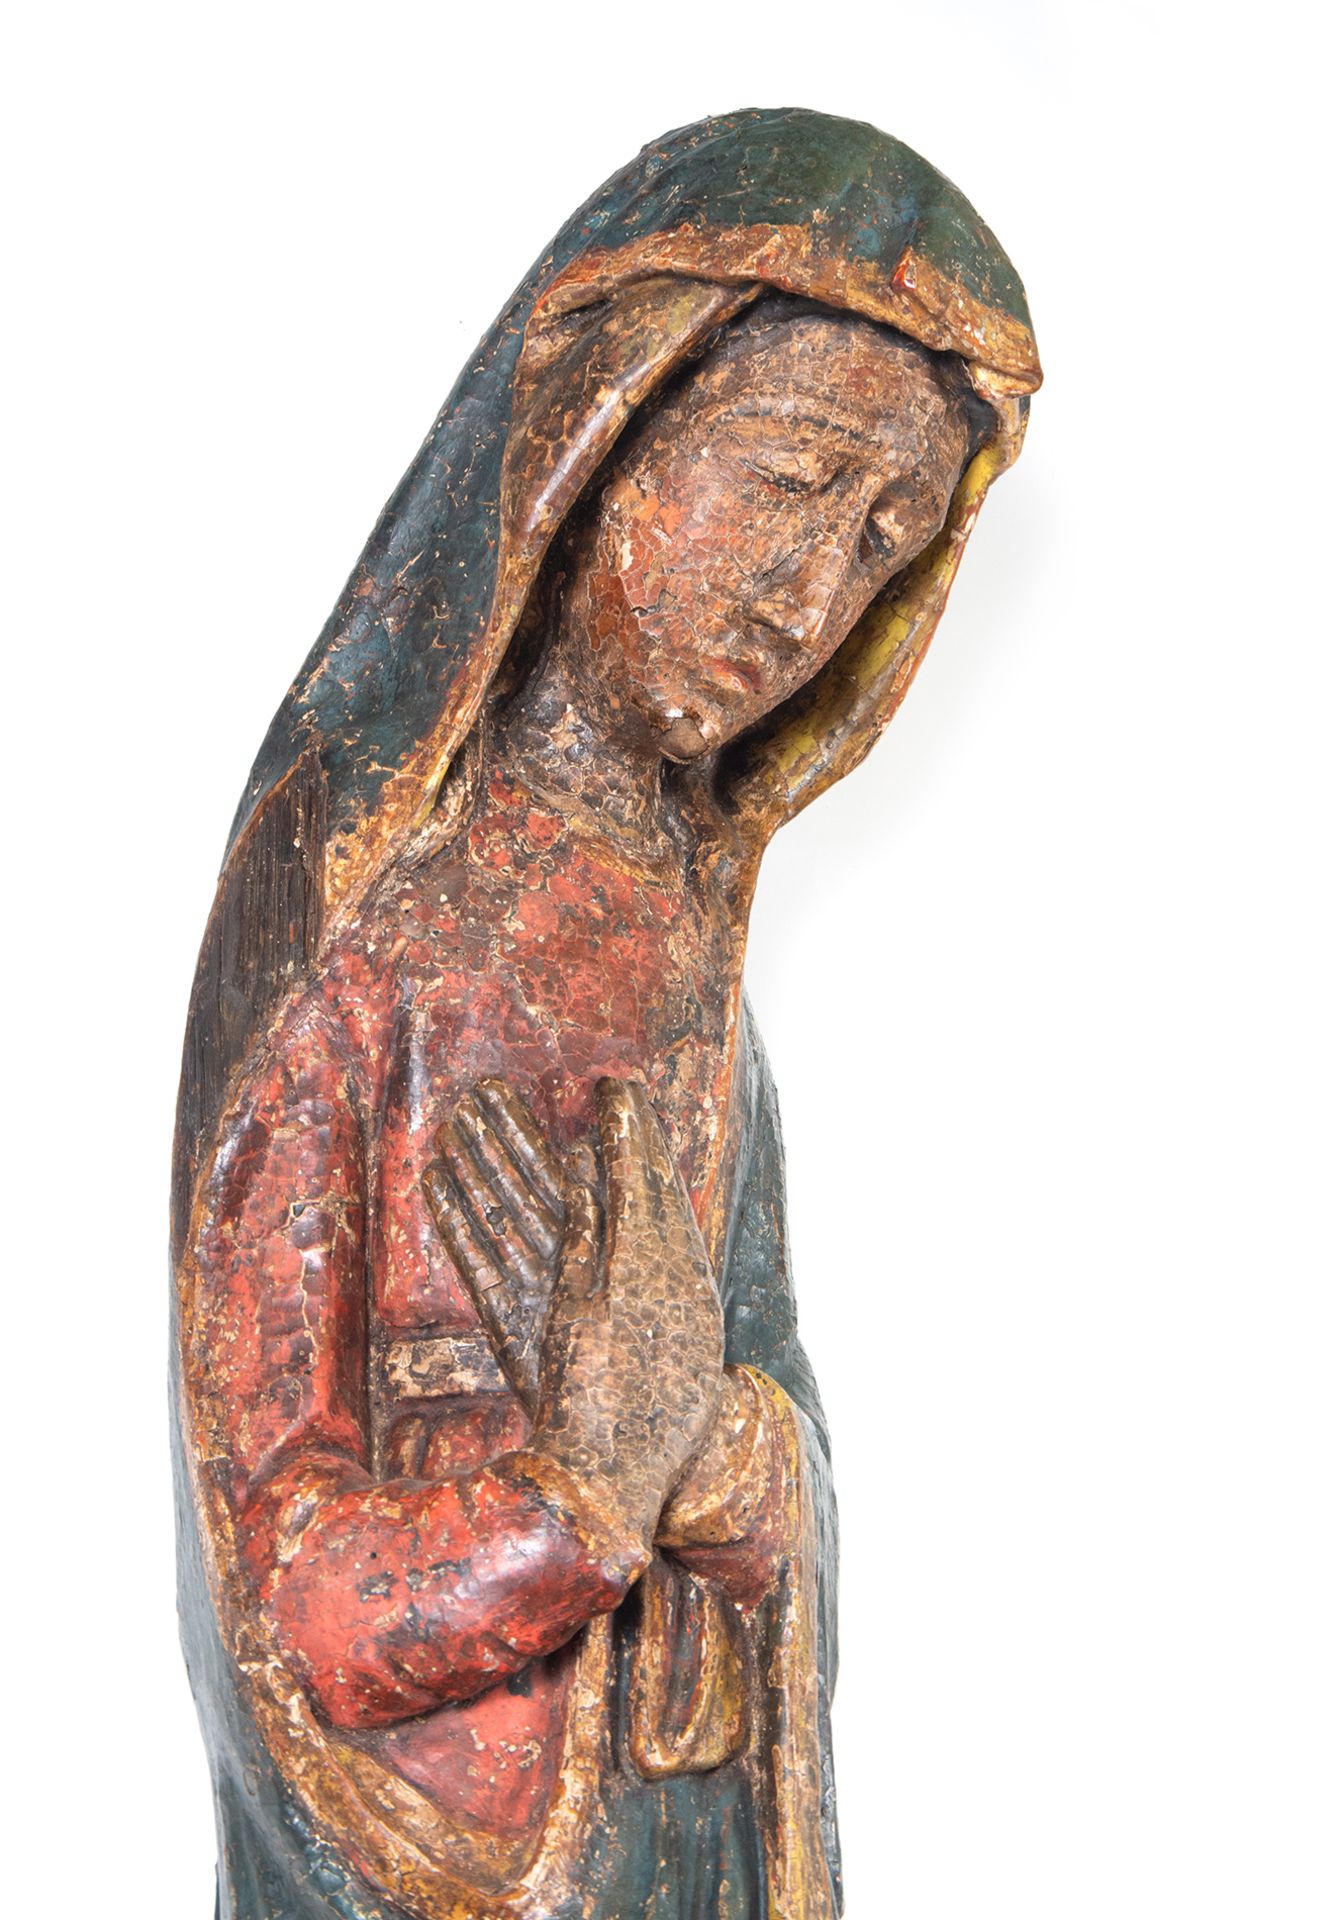 Pair of Large Romanesque Carvings representing Mary and Saint John the Evangelist, Romanesque School - Image 19 of 22